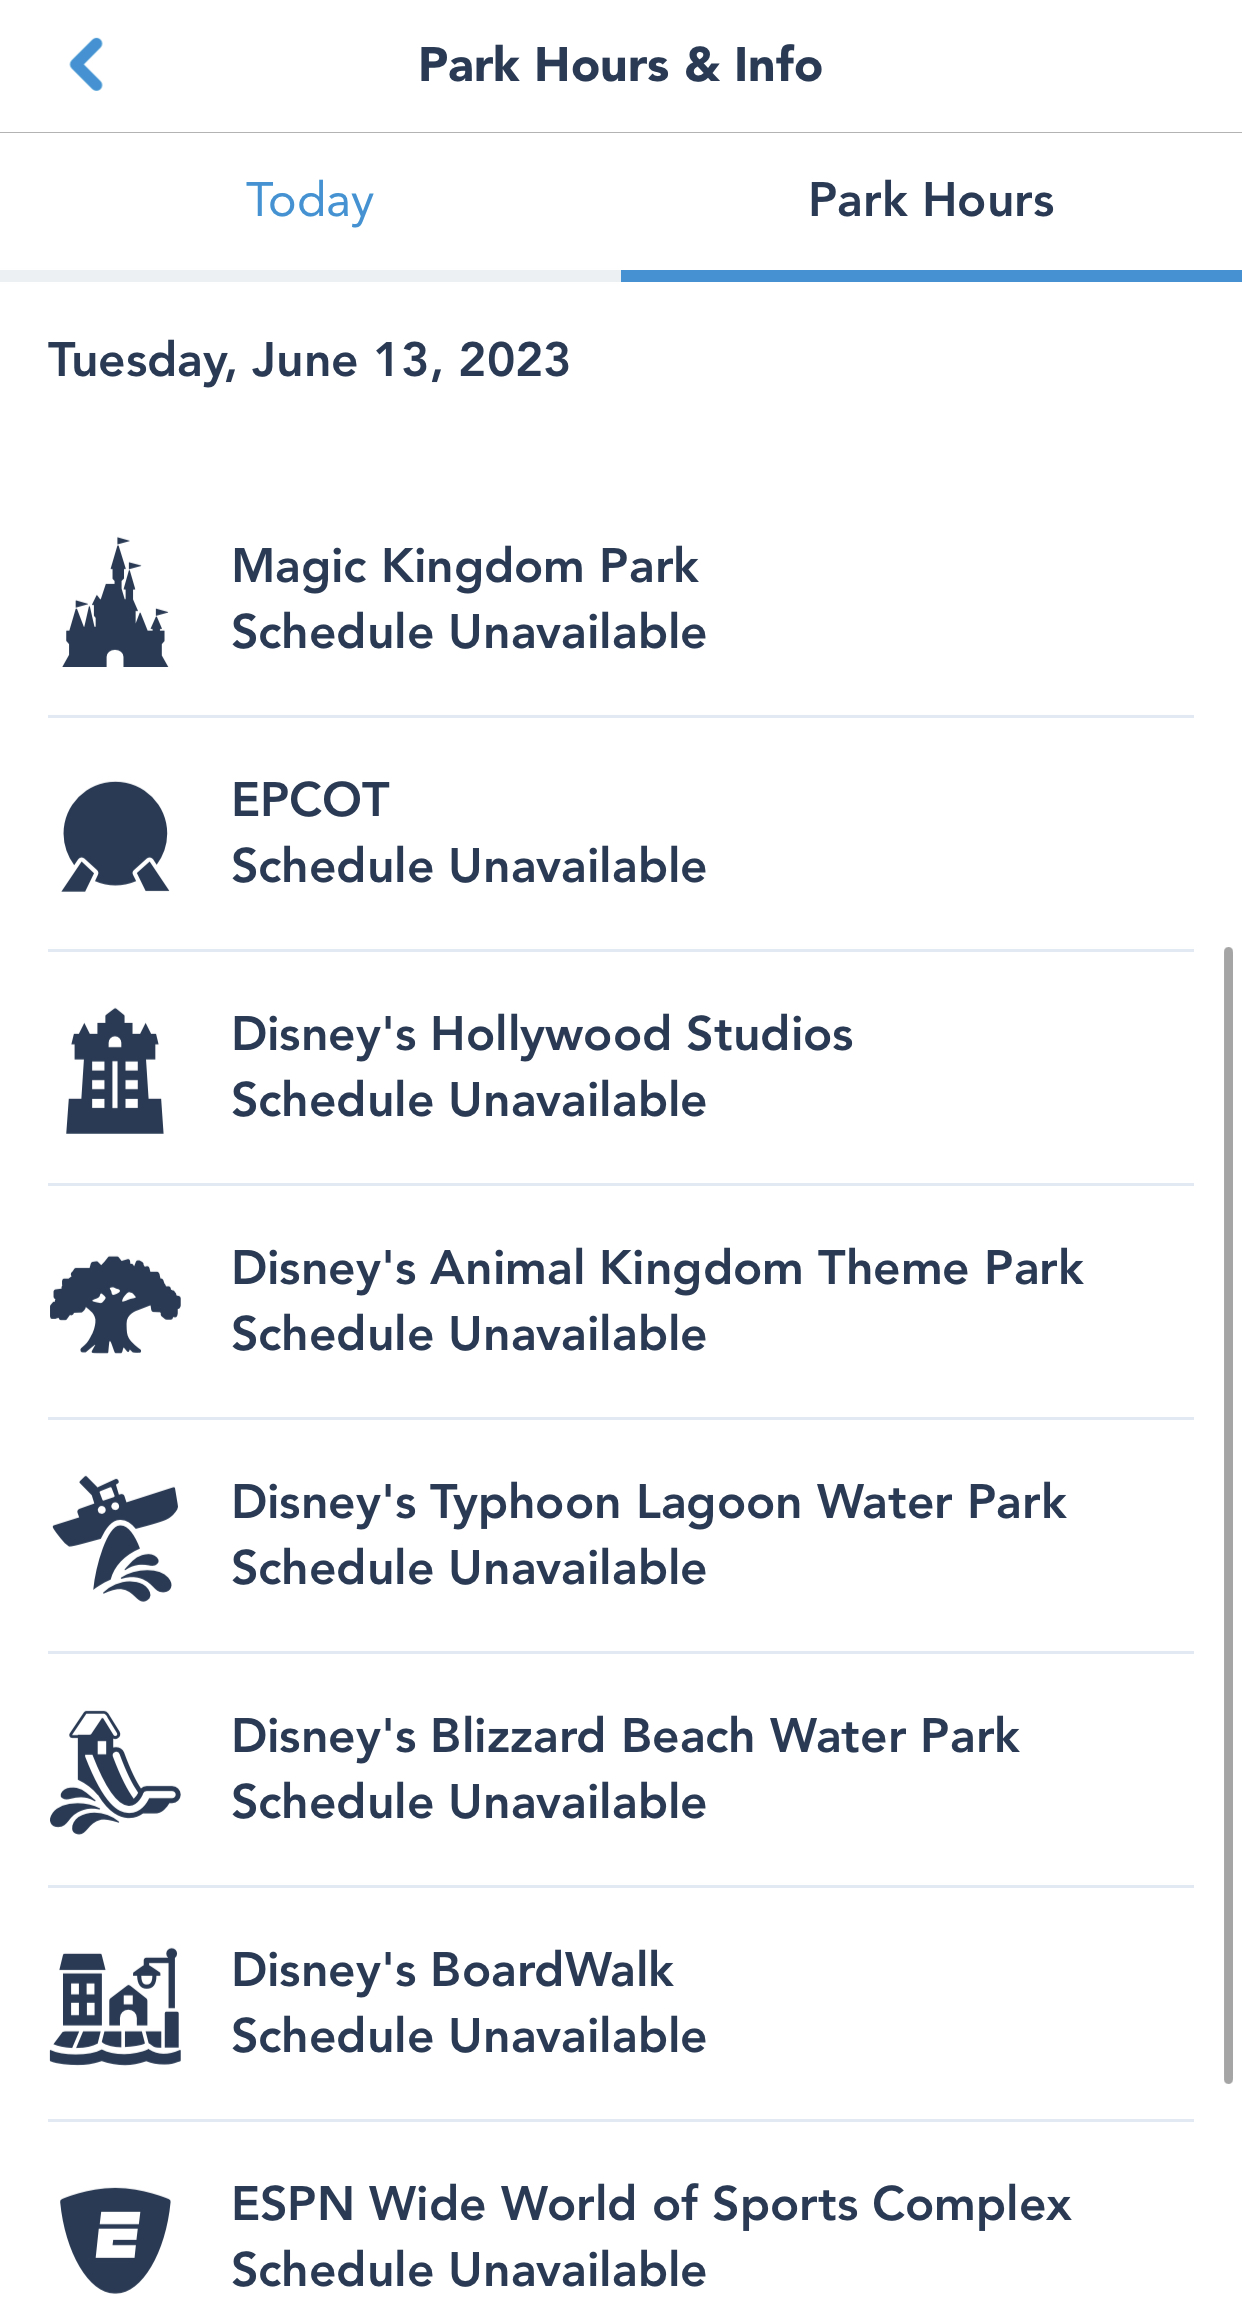 Disney World Digitial Experiences Currently Unavailable